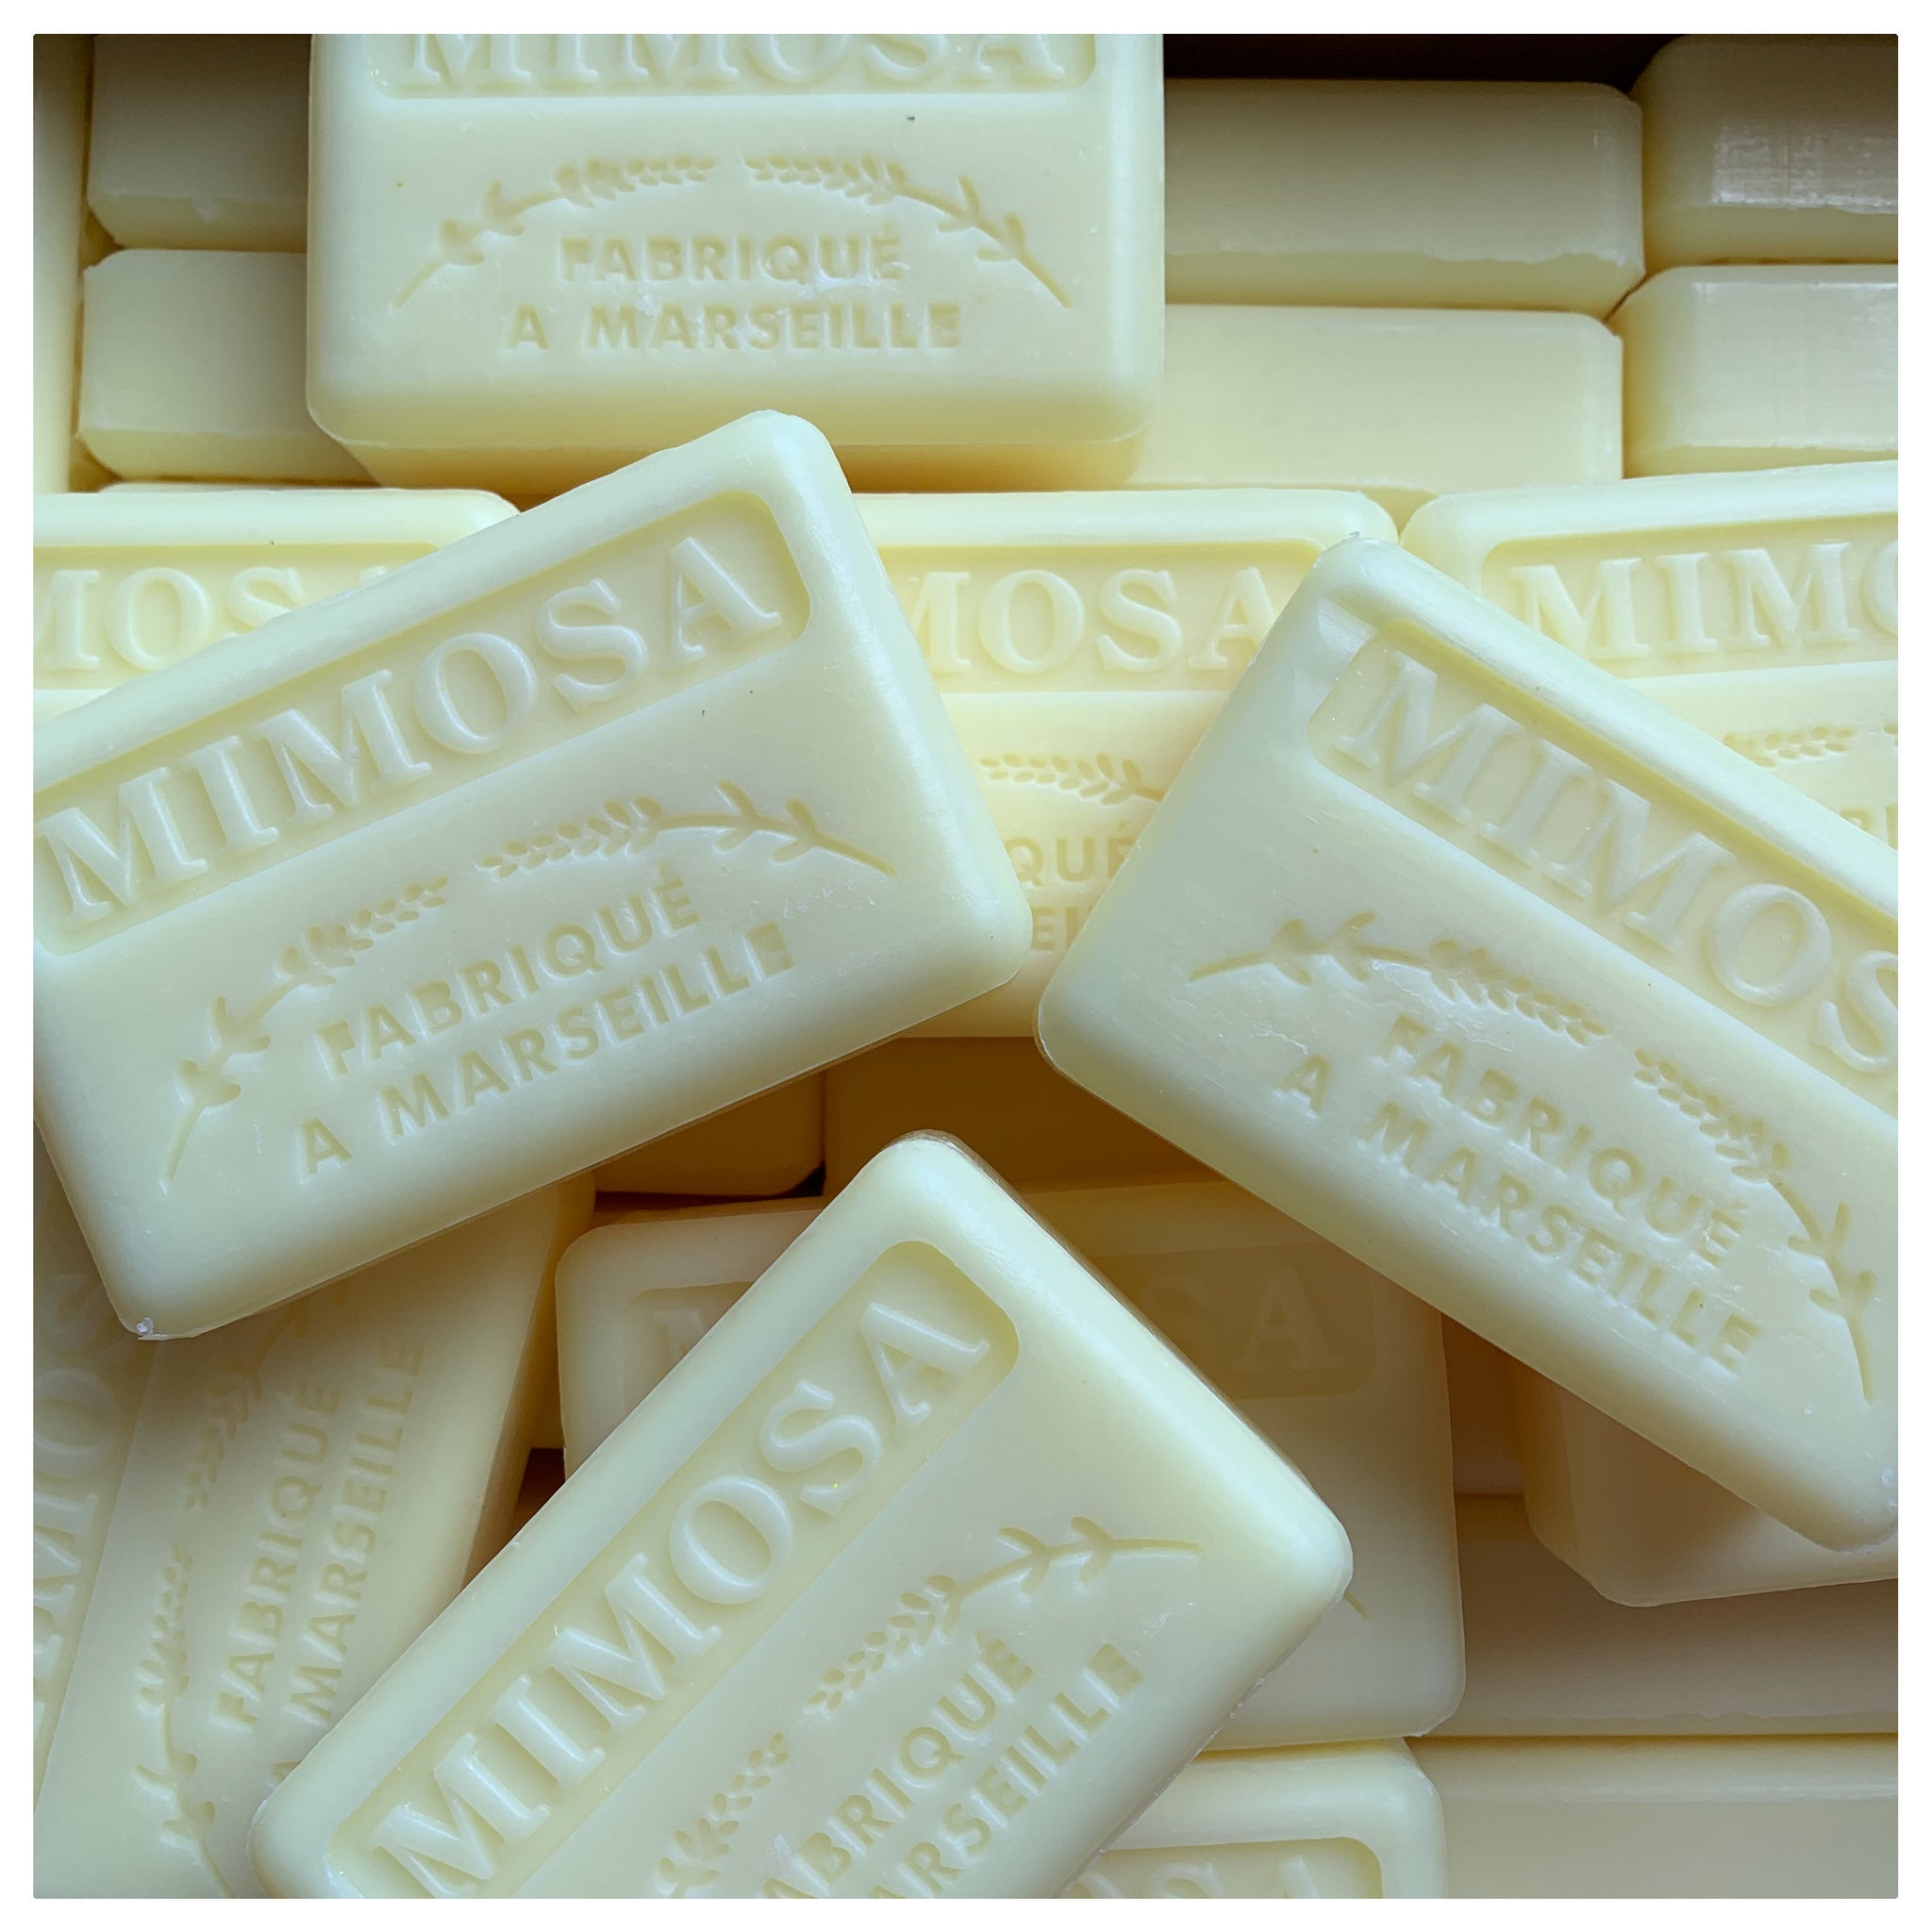 125G Savon De Marseille Mimosa French Soap Bar | natural french soap